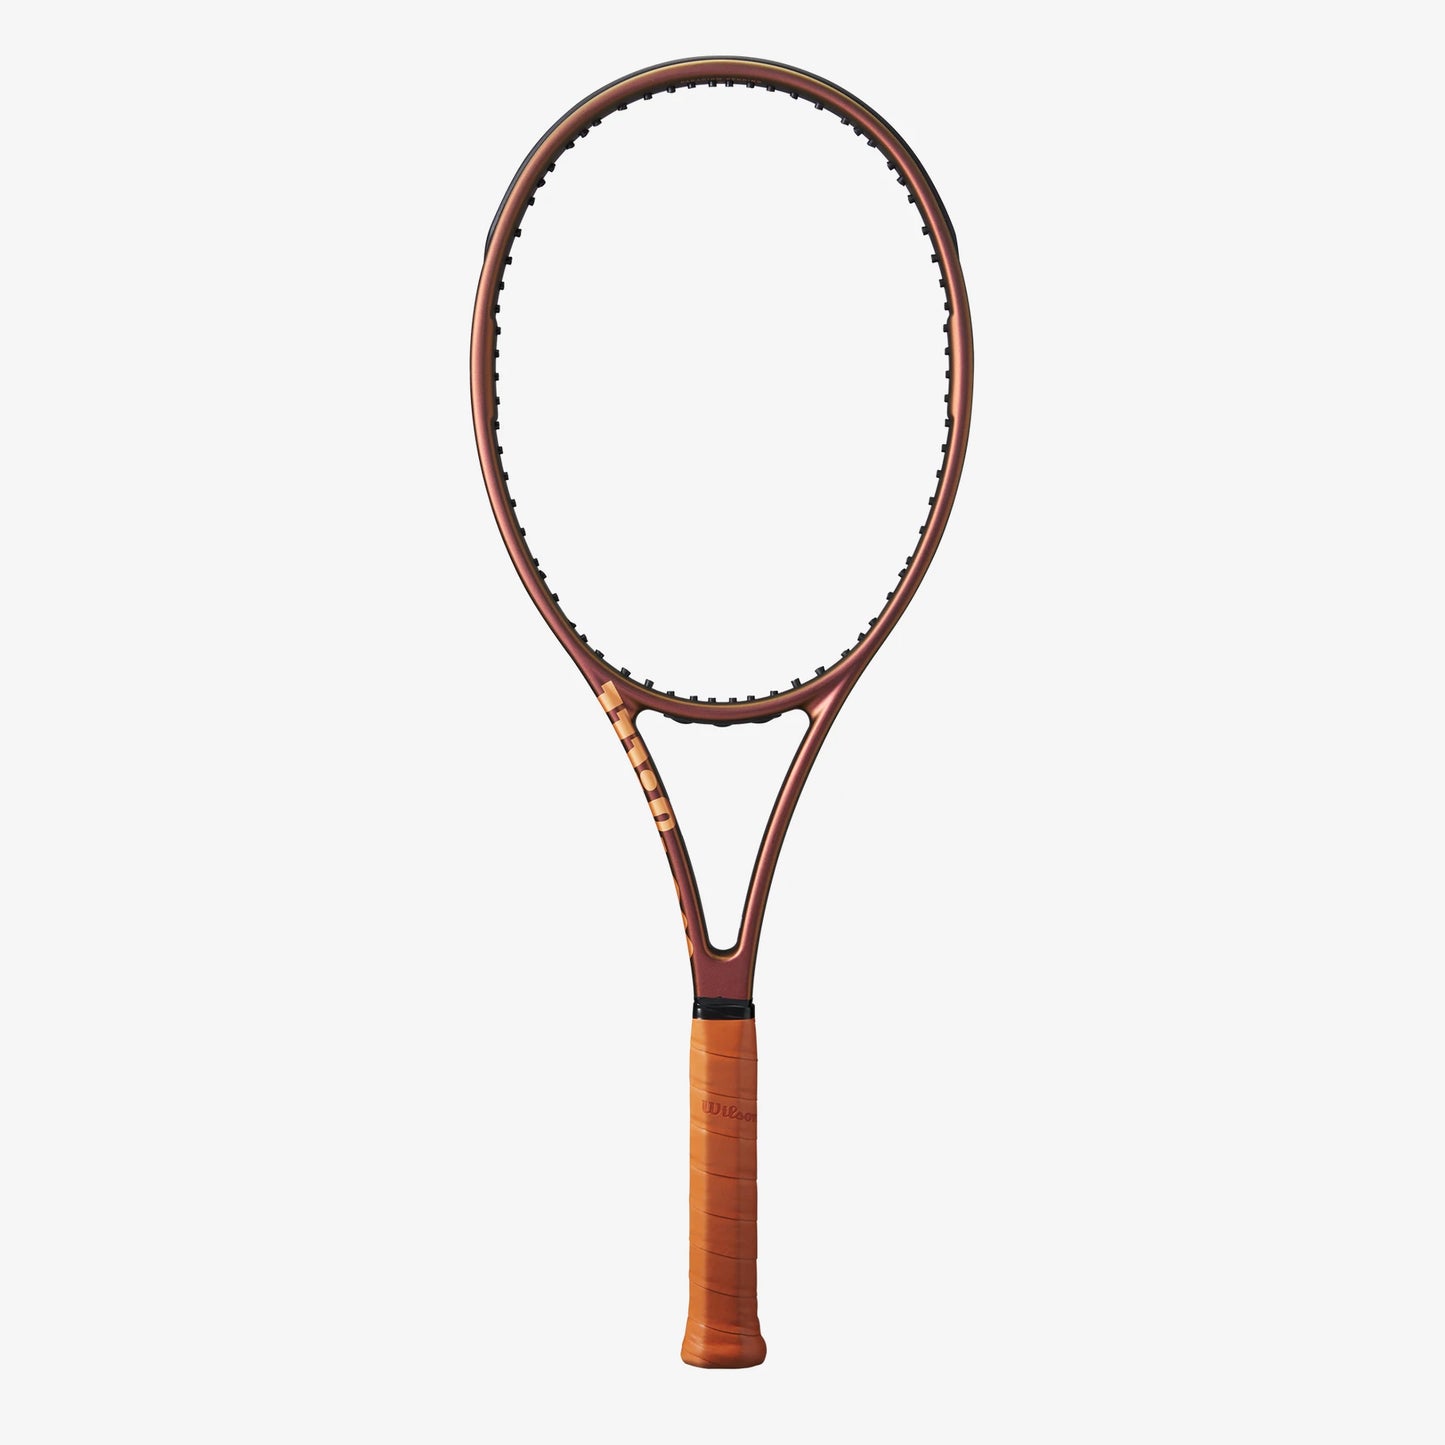 Pro Staff 97 V14 Tennis Racket which is available for sale at GSM Sports